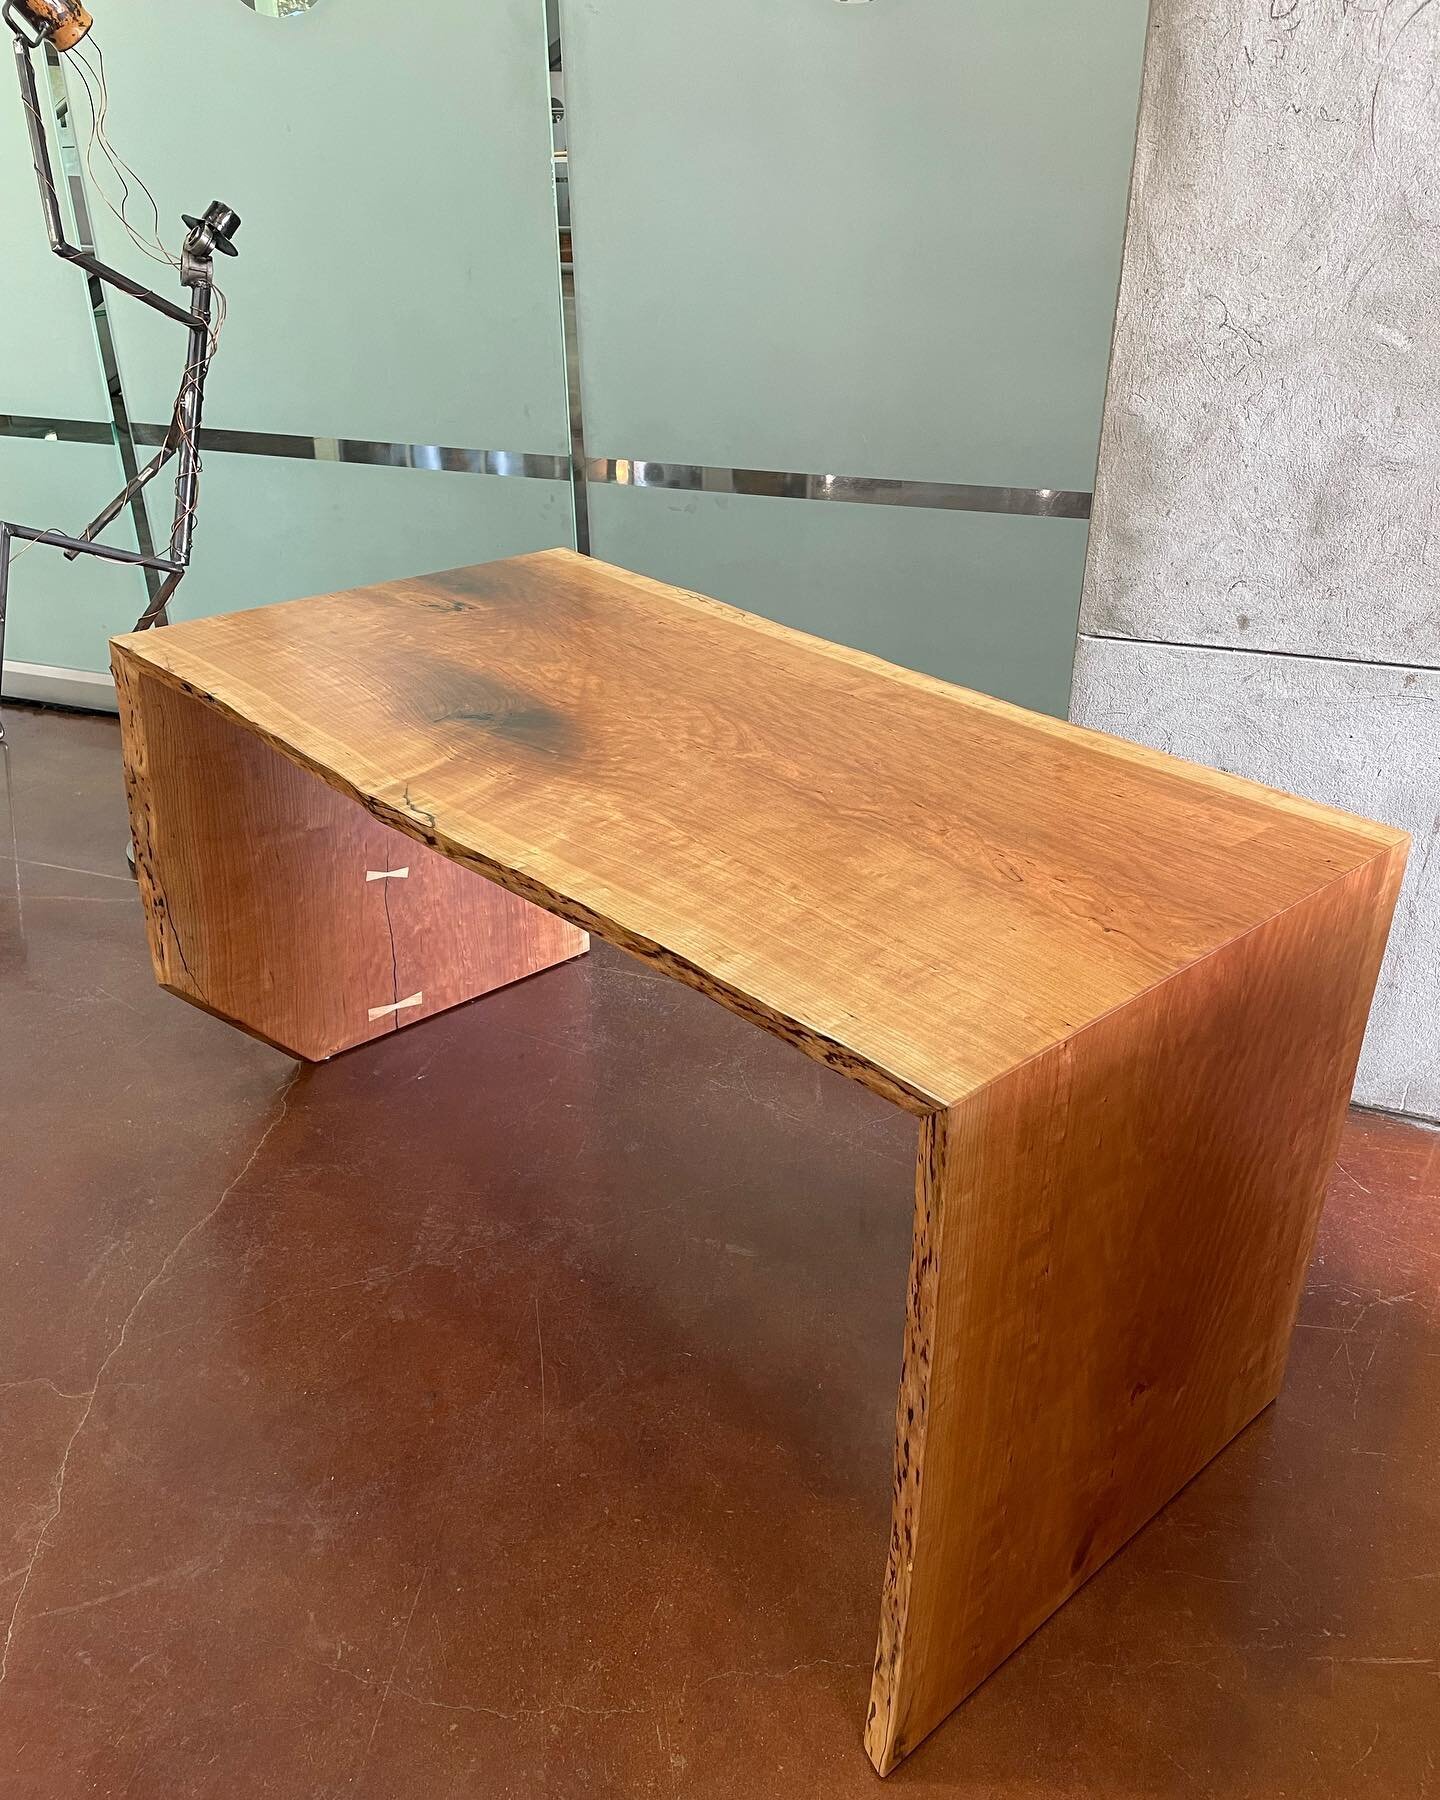 Here is a closer look at the cherry desk David built for the Craftsman's Guild jury submission. Contact us if you are interested in purchasing this desk! #dpluspdesignbuild